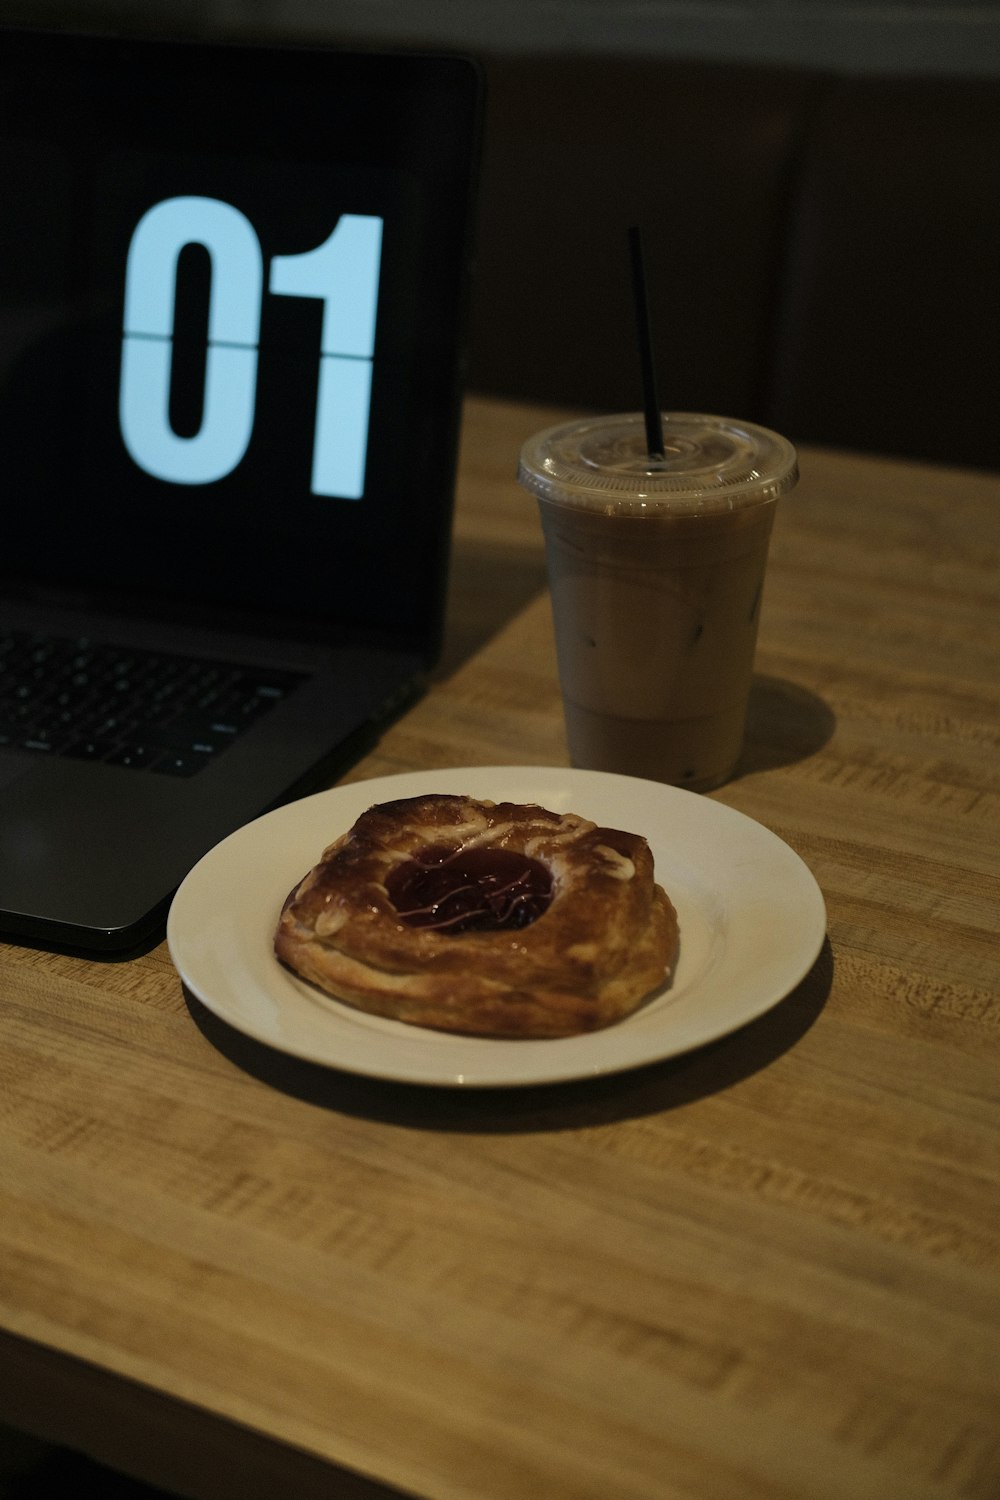 a plate of food next to a laptop on a table